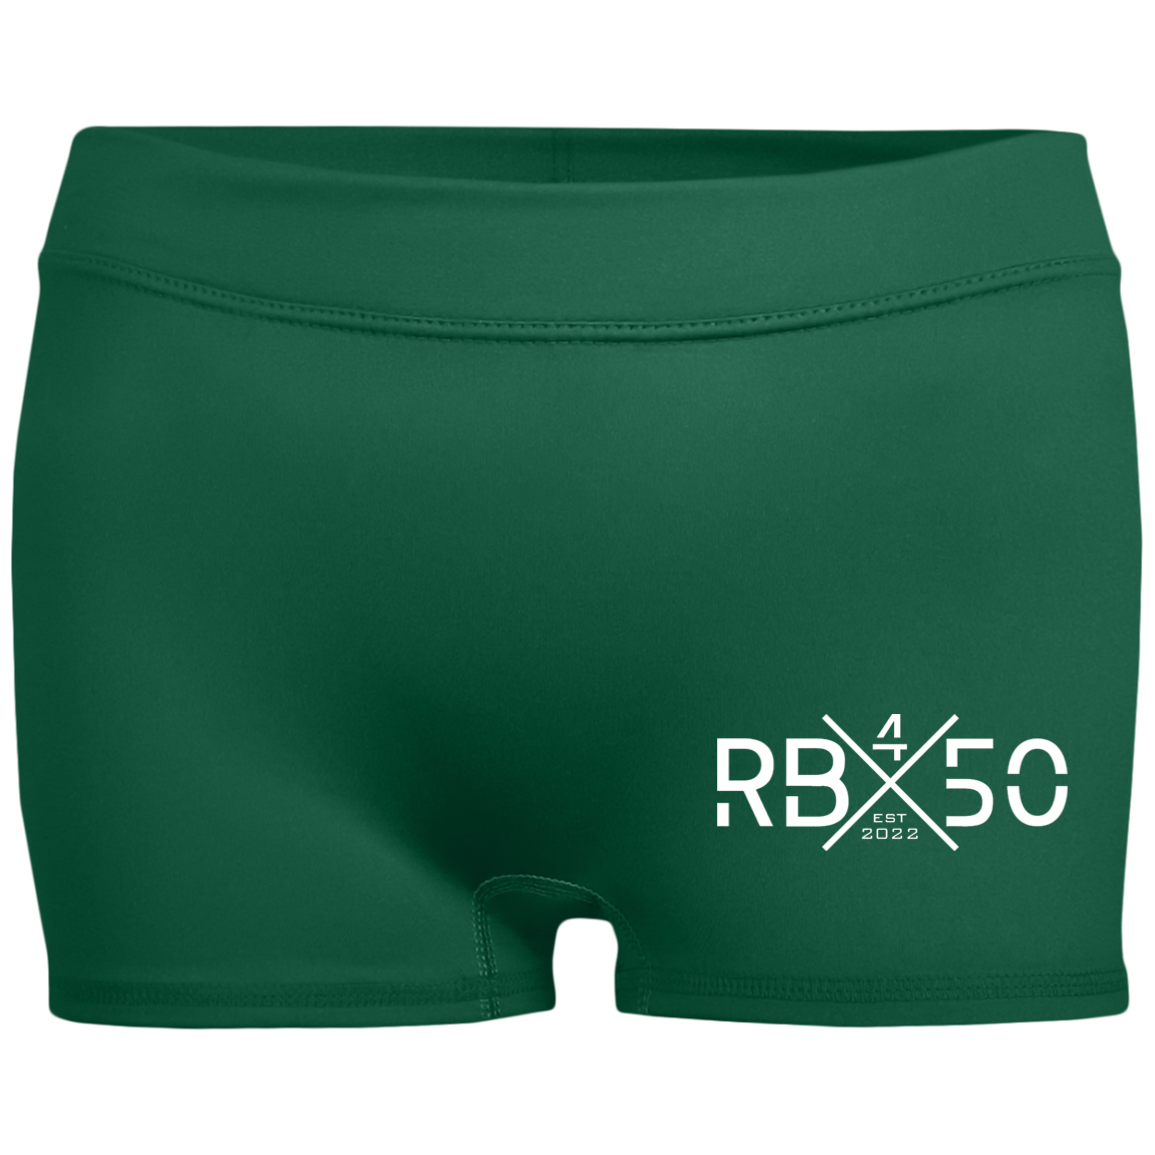 RB450 LOGO Ladies' Fitted Moisture-Wicking 2.5 inch Inseam Shorts